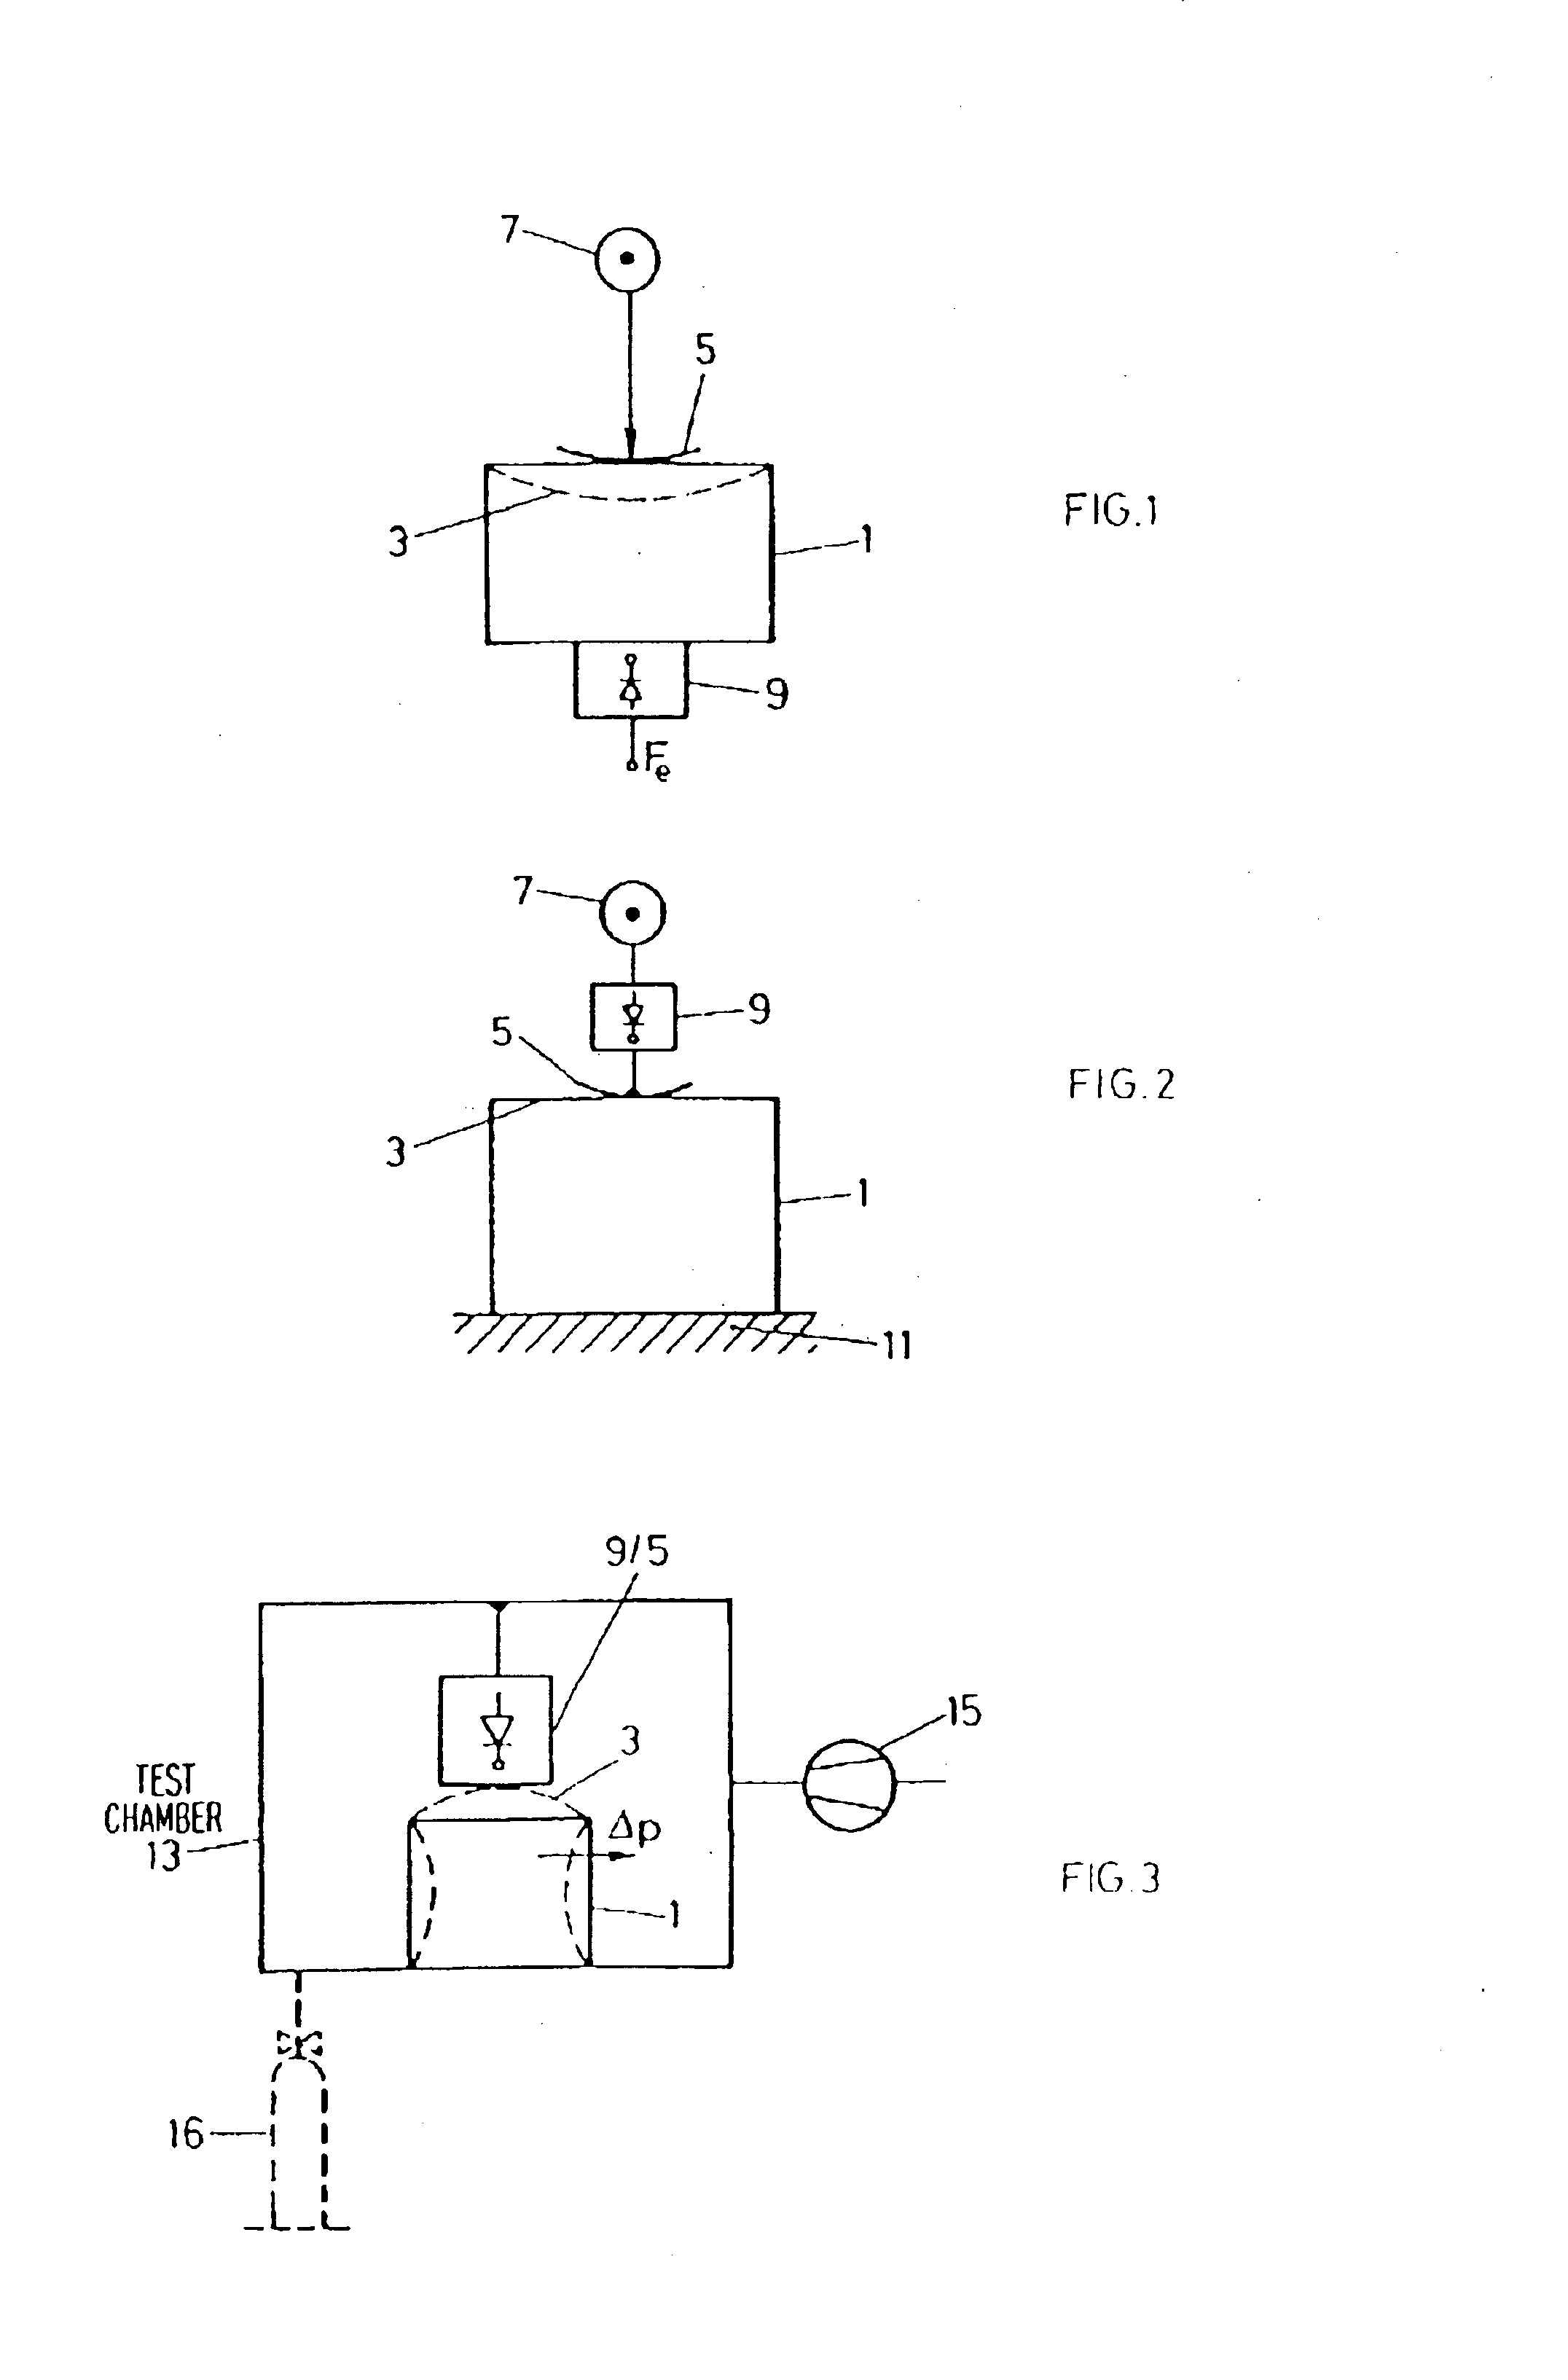 Method and apparatus for leak testing closed containers